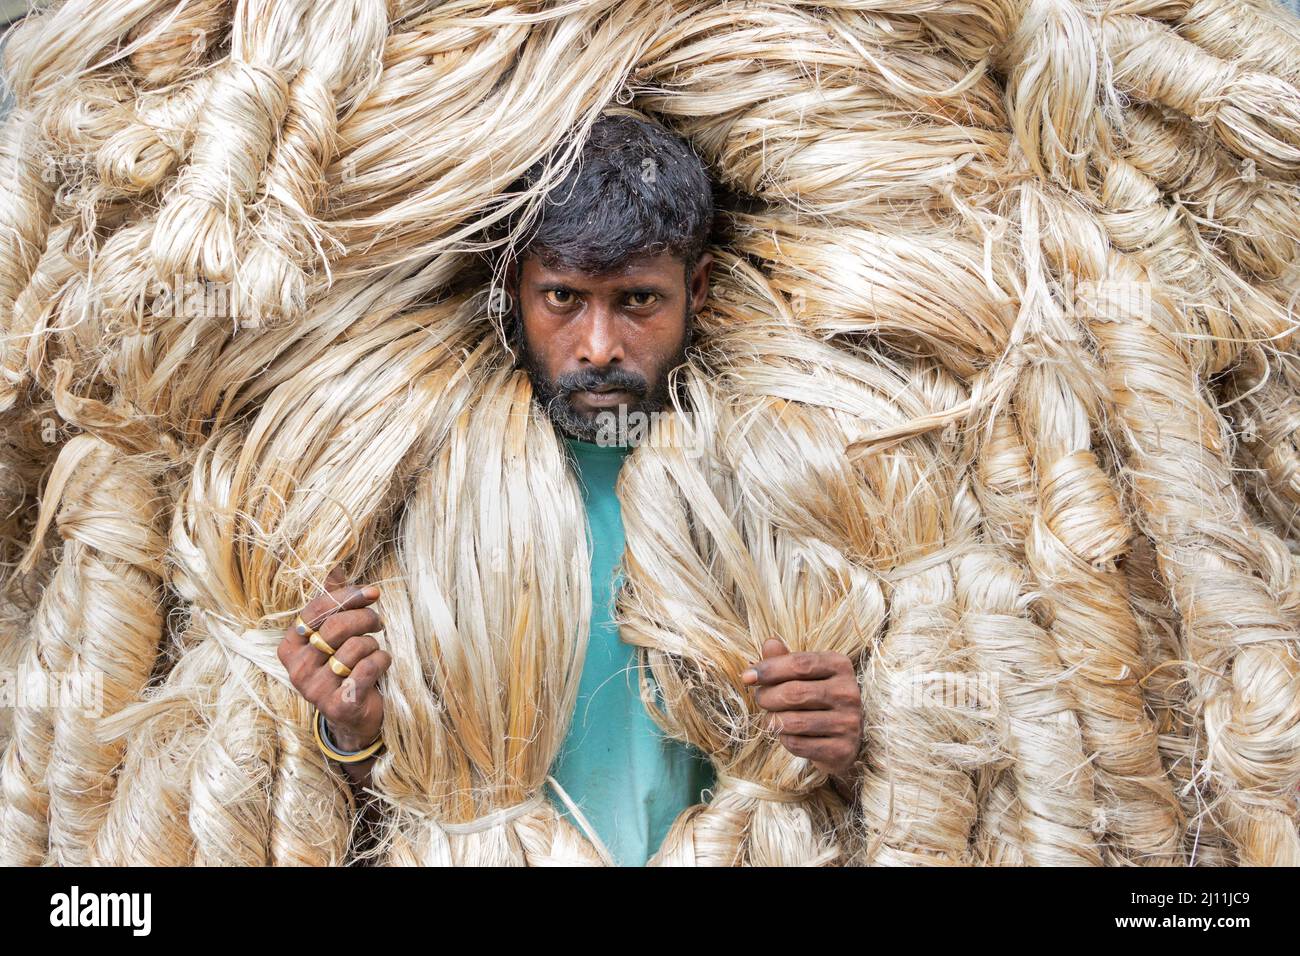 A worker carries heavy jute fibres on the shoulder in Manikganj, Bangladesh. Jute is the golden fiber of Bangladesh. Eighty percent of the world's high quality jute grows in Bangladesh. Jute is used in making cloth, shawl, ropes, carpet backing cloth, gunny bags and many other useful things. Jute bags are very suitable for packing of food grains. Bangladesh earns lots of foreign currency by exporting jute and jute products to foreign countries. Bangladesh. Stock Photo